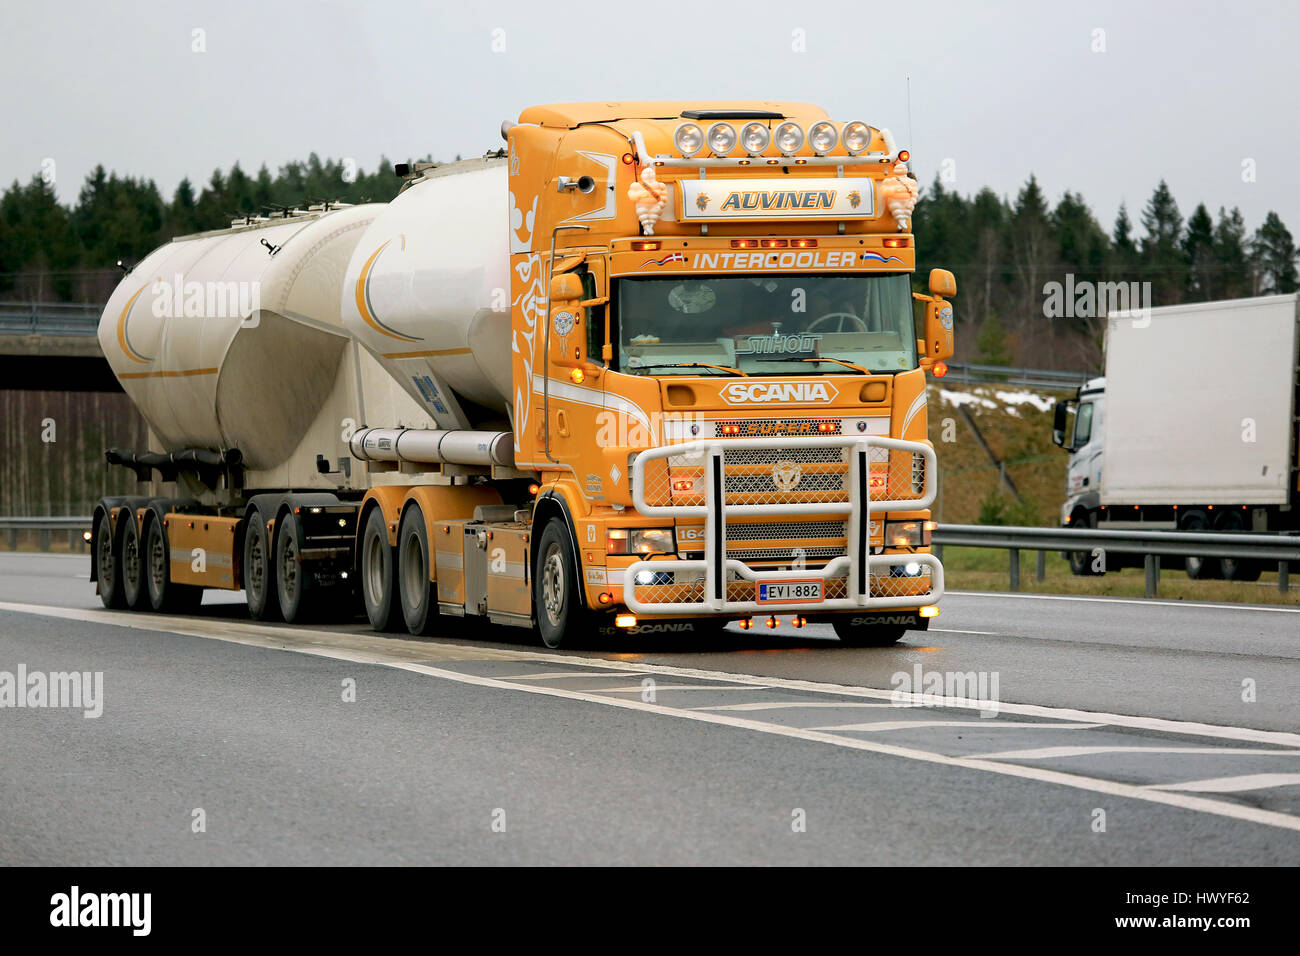 SALO, FINLAND - NOVEMBER 18, 2016: Super tank truck Scania R164 of Kuljetus Auvinen Oy on the road in Salo on a rainy afternoon. Stock Photo